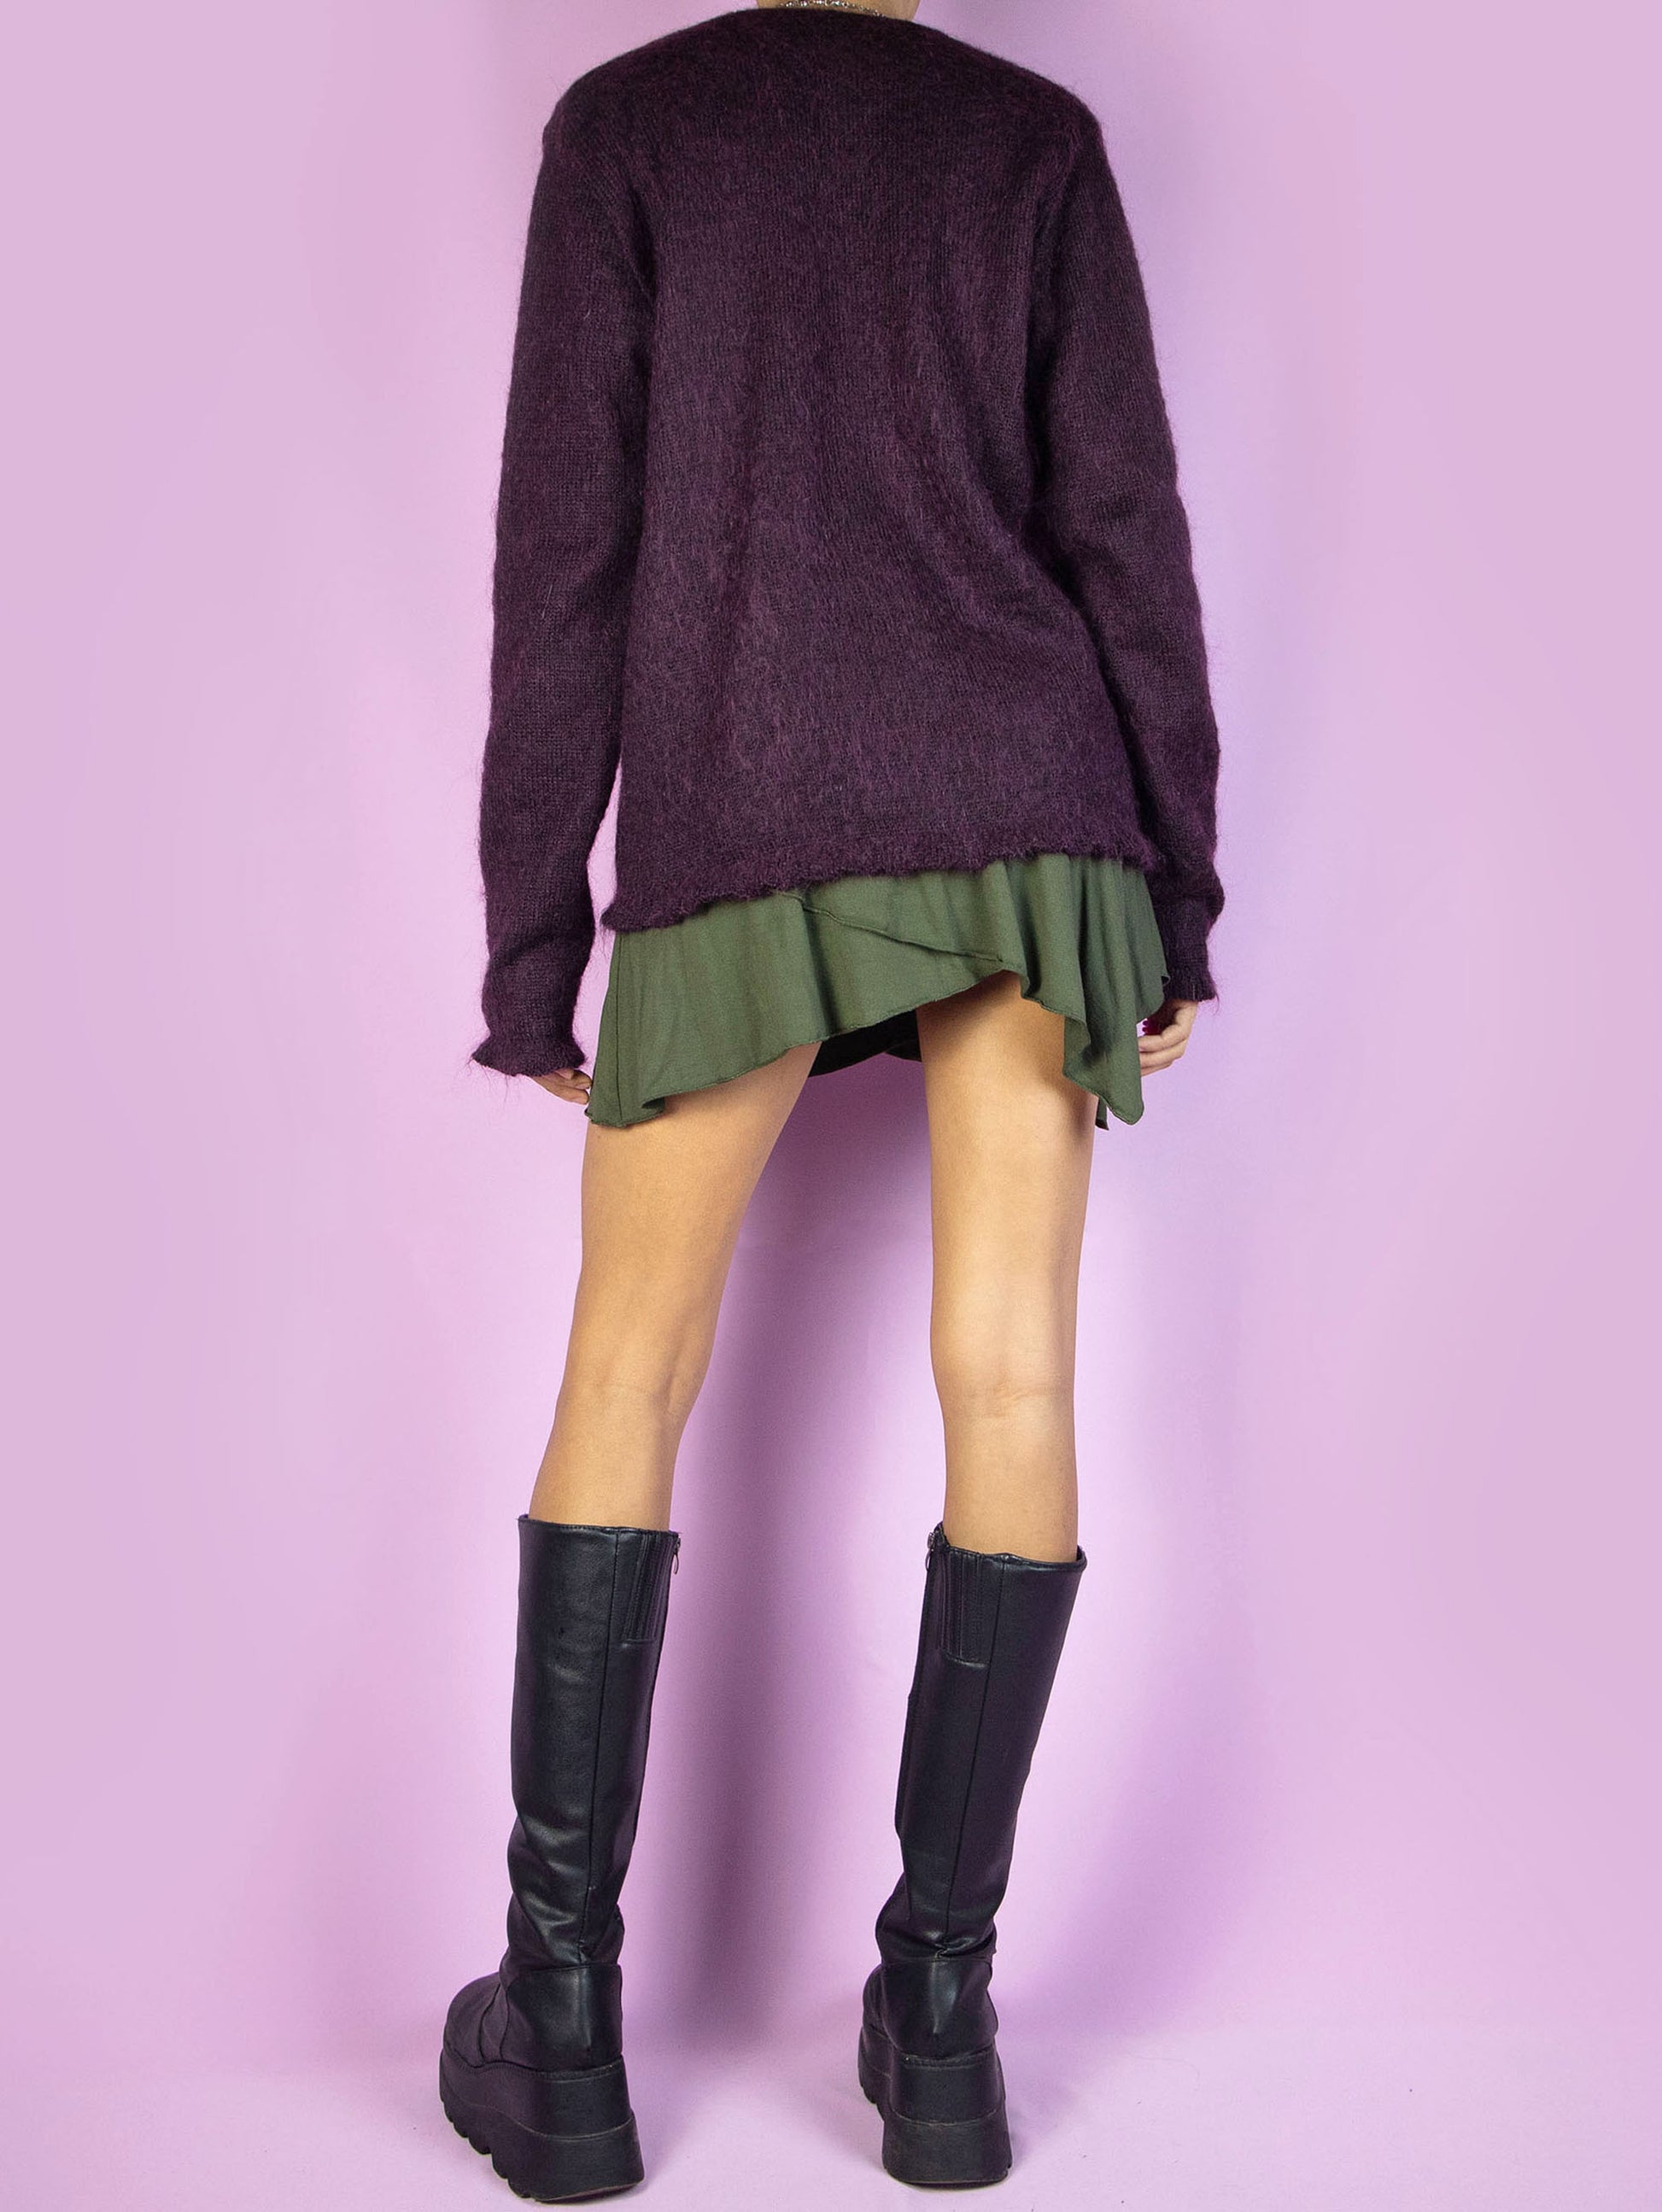 The Y2K Purple Tie Front Cardigan is a vintage 2000s dark purple mohair blend knit cardigan sweater featuring a tied front.